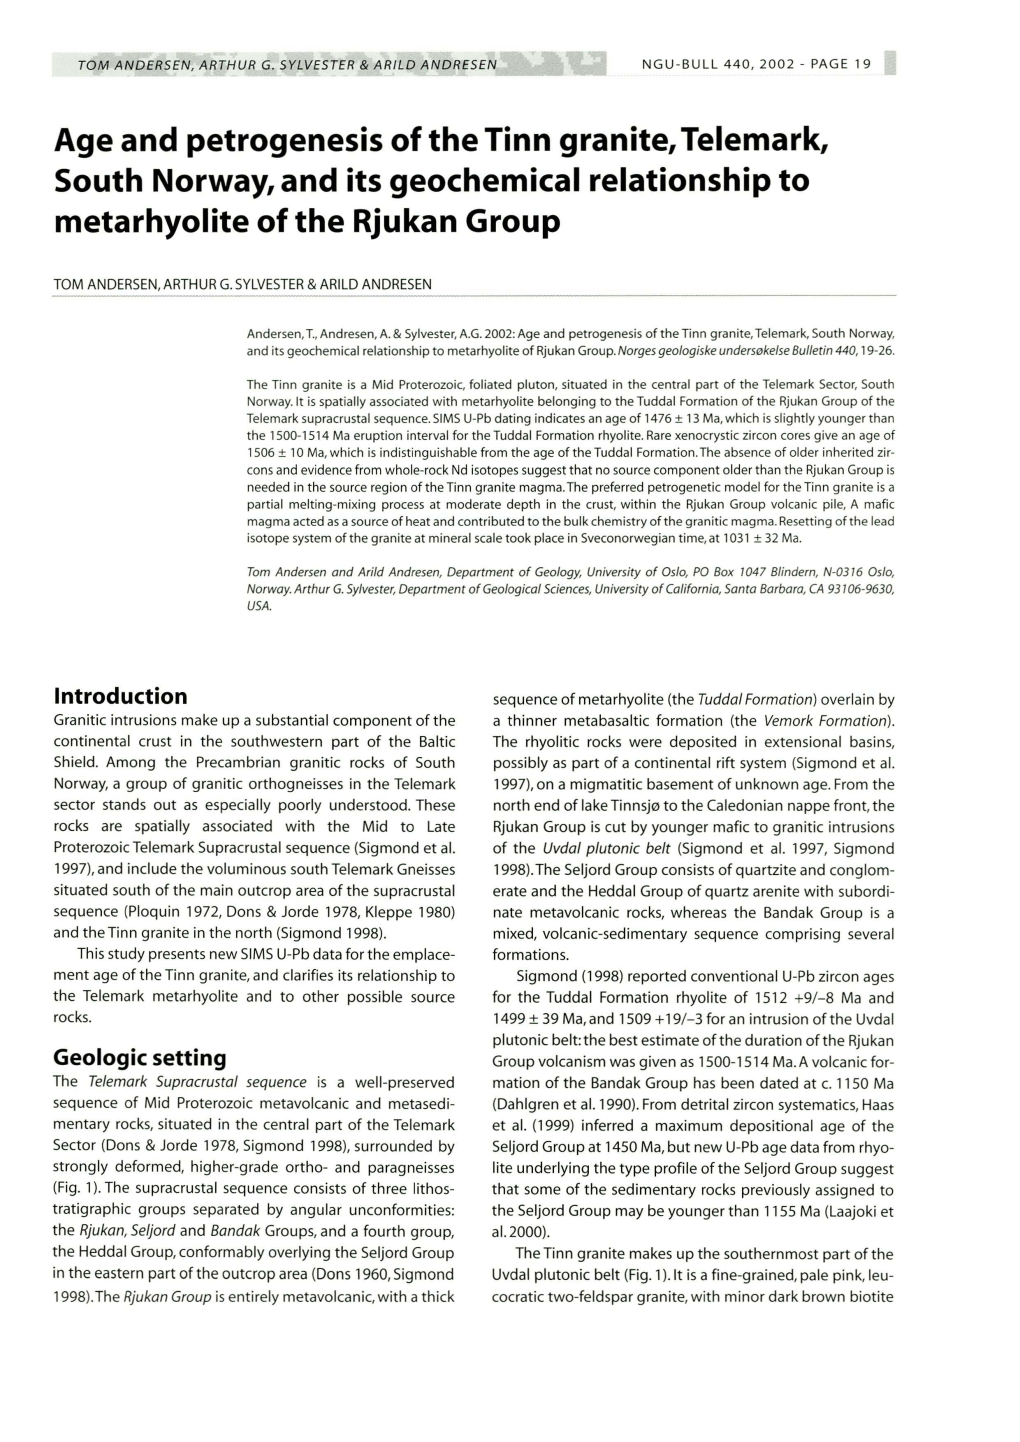 Age and Petrogenesis of the Tinn Granite,Telemark, South Norway, and Its Geochemical Relationship to Metarhyolite of the Rjukan Group